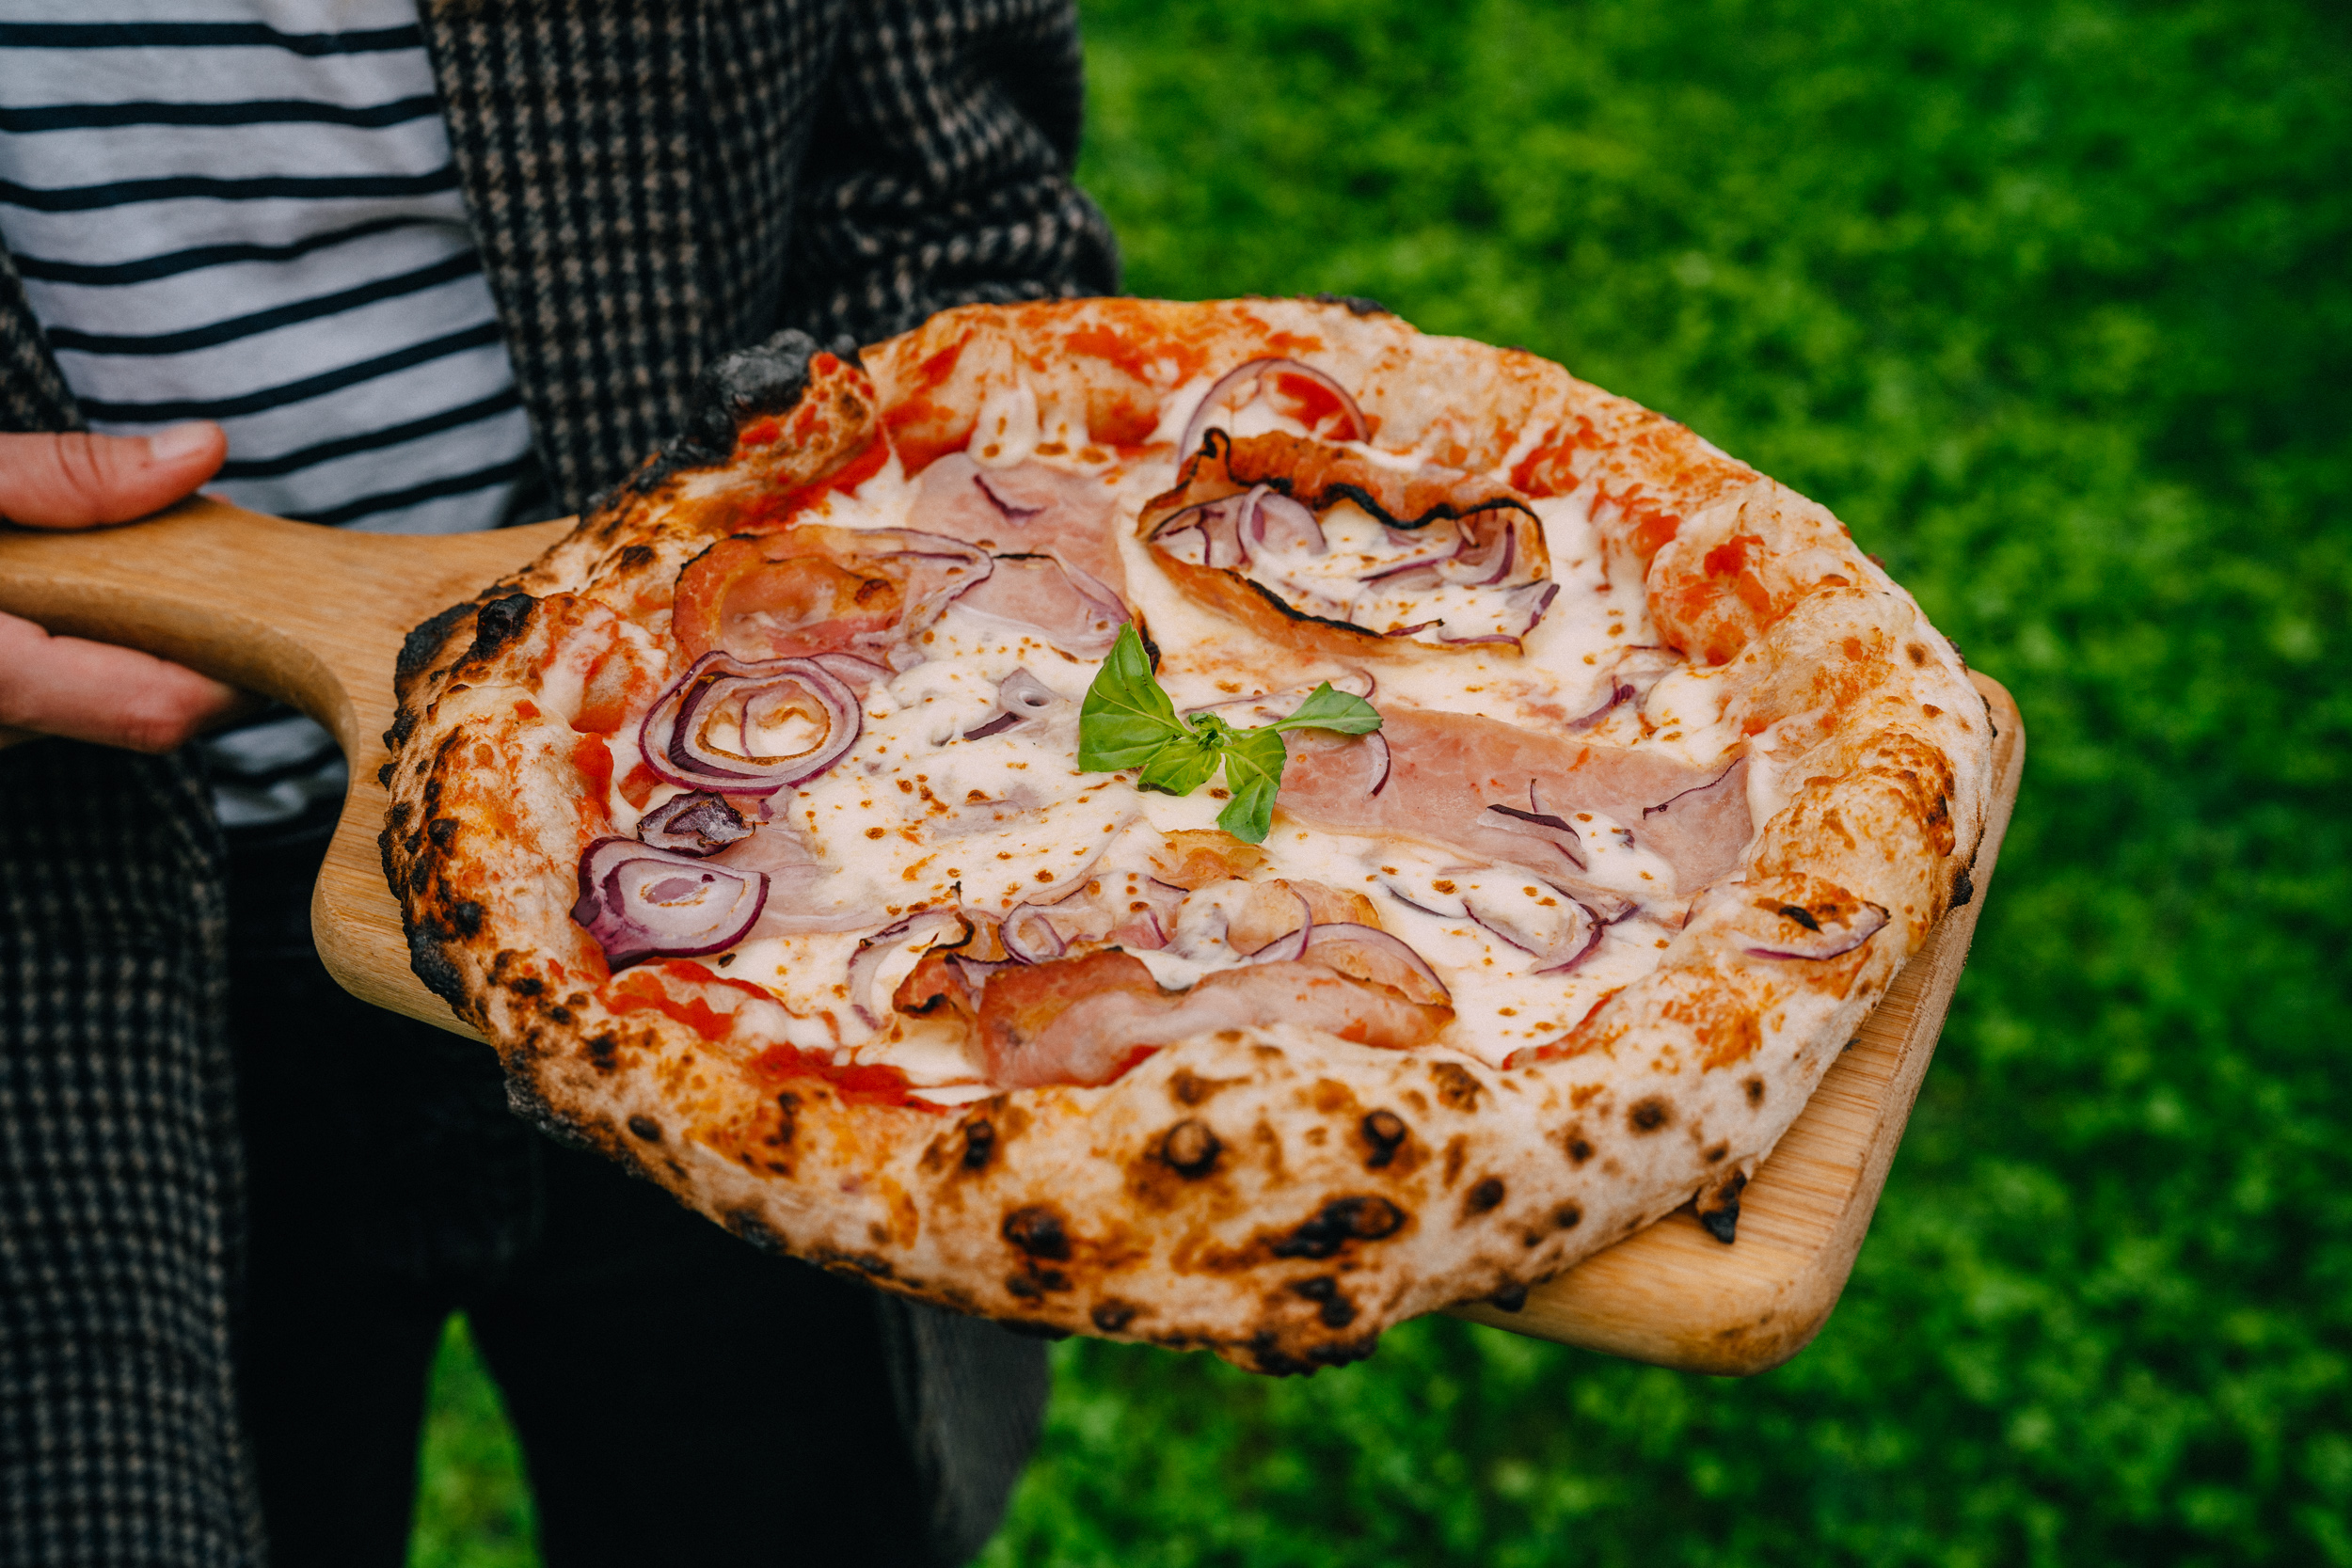 What are some title ideas for a report about Zagreb Pizza Festival and all the things people can taste there 